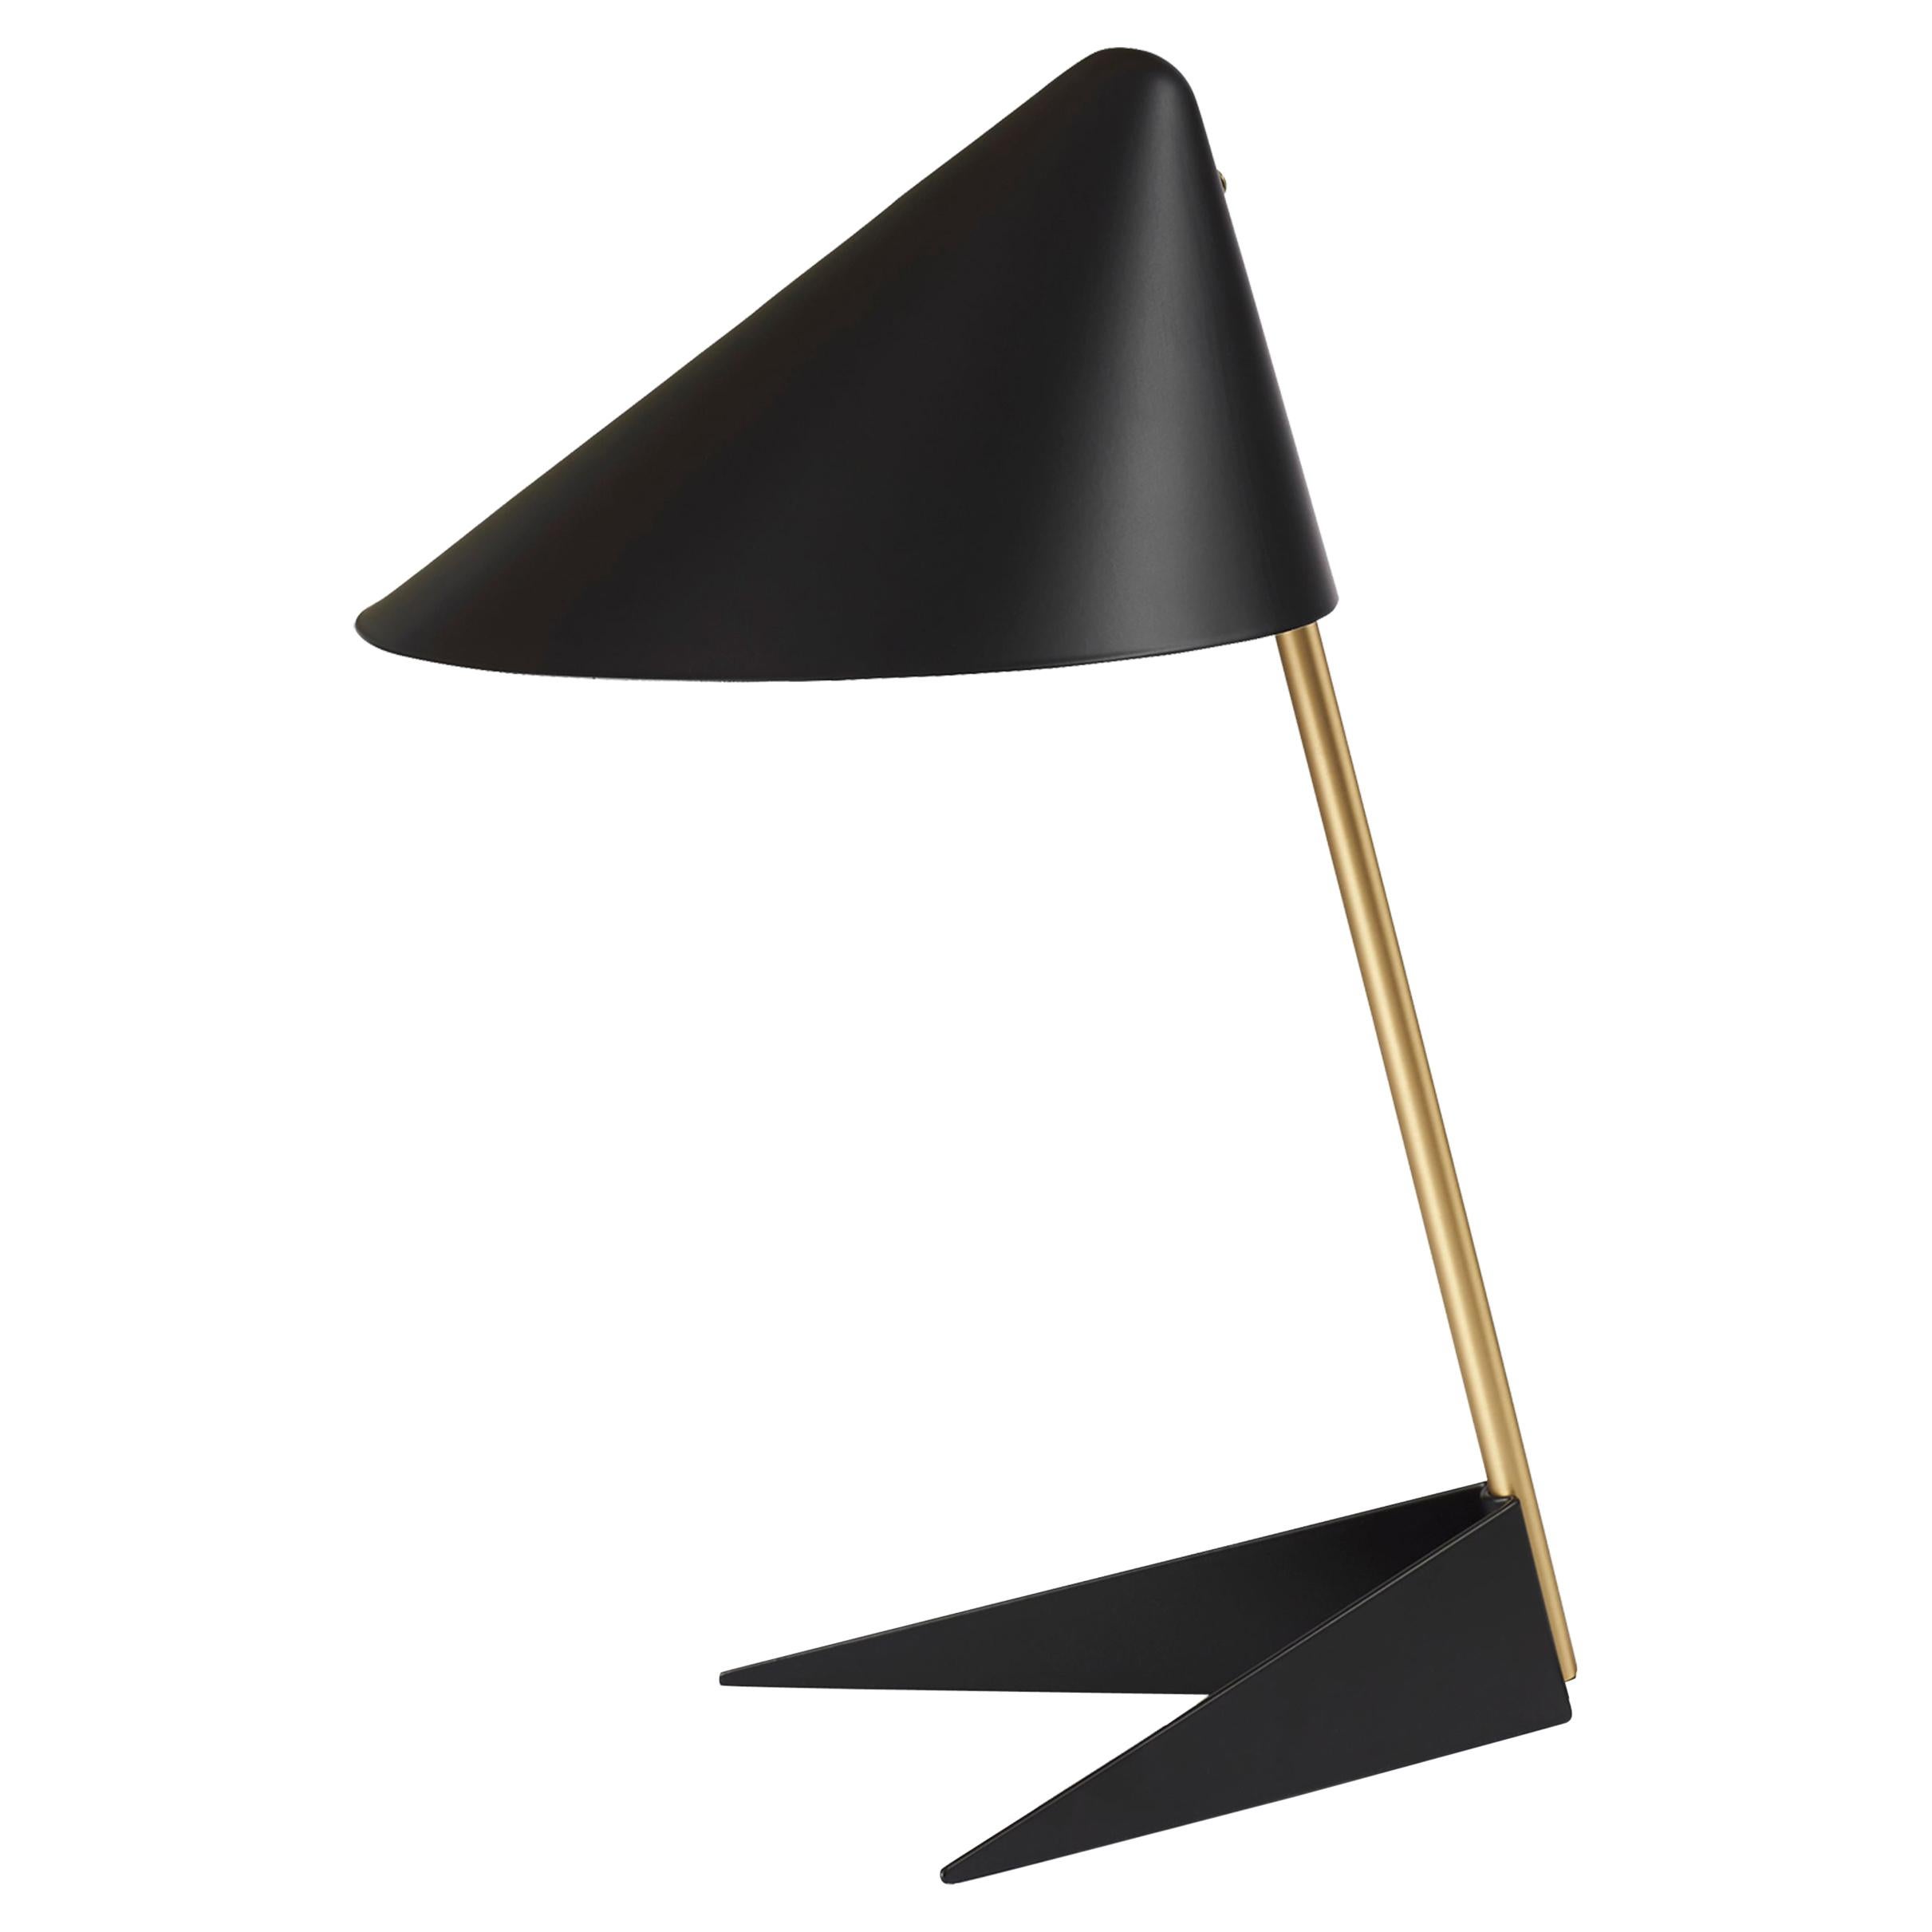 Ambience Brass Table Lamp, by Svend Aage Holm-sørensen from Warm Nordic